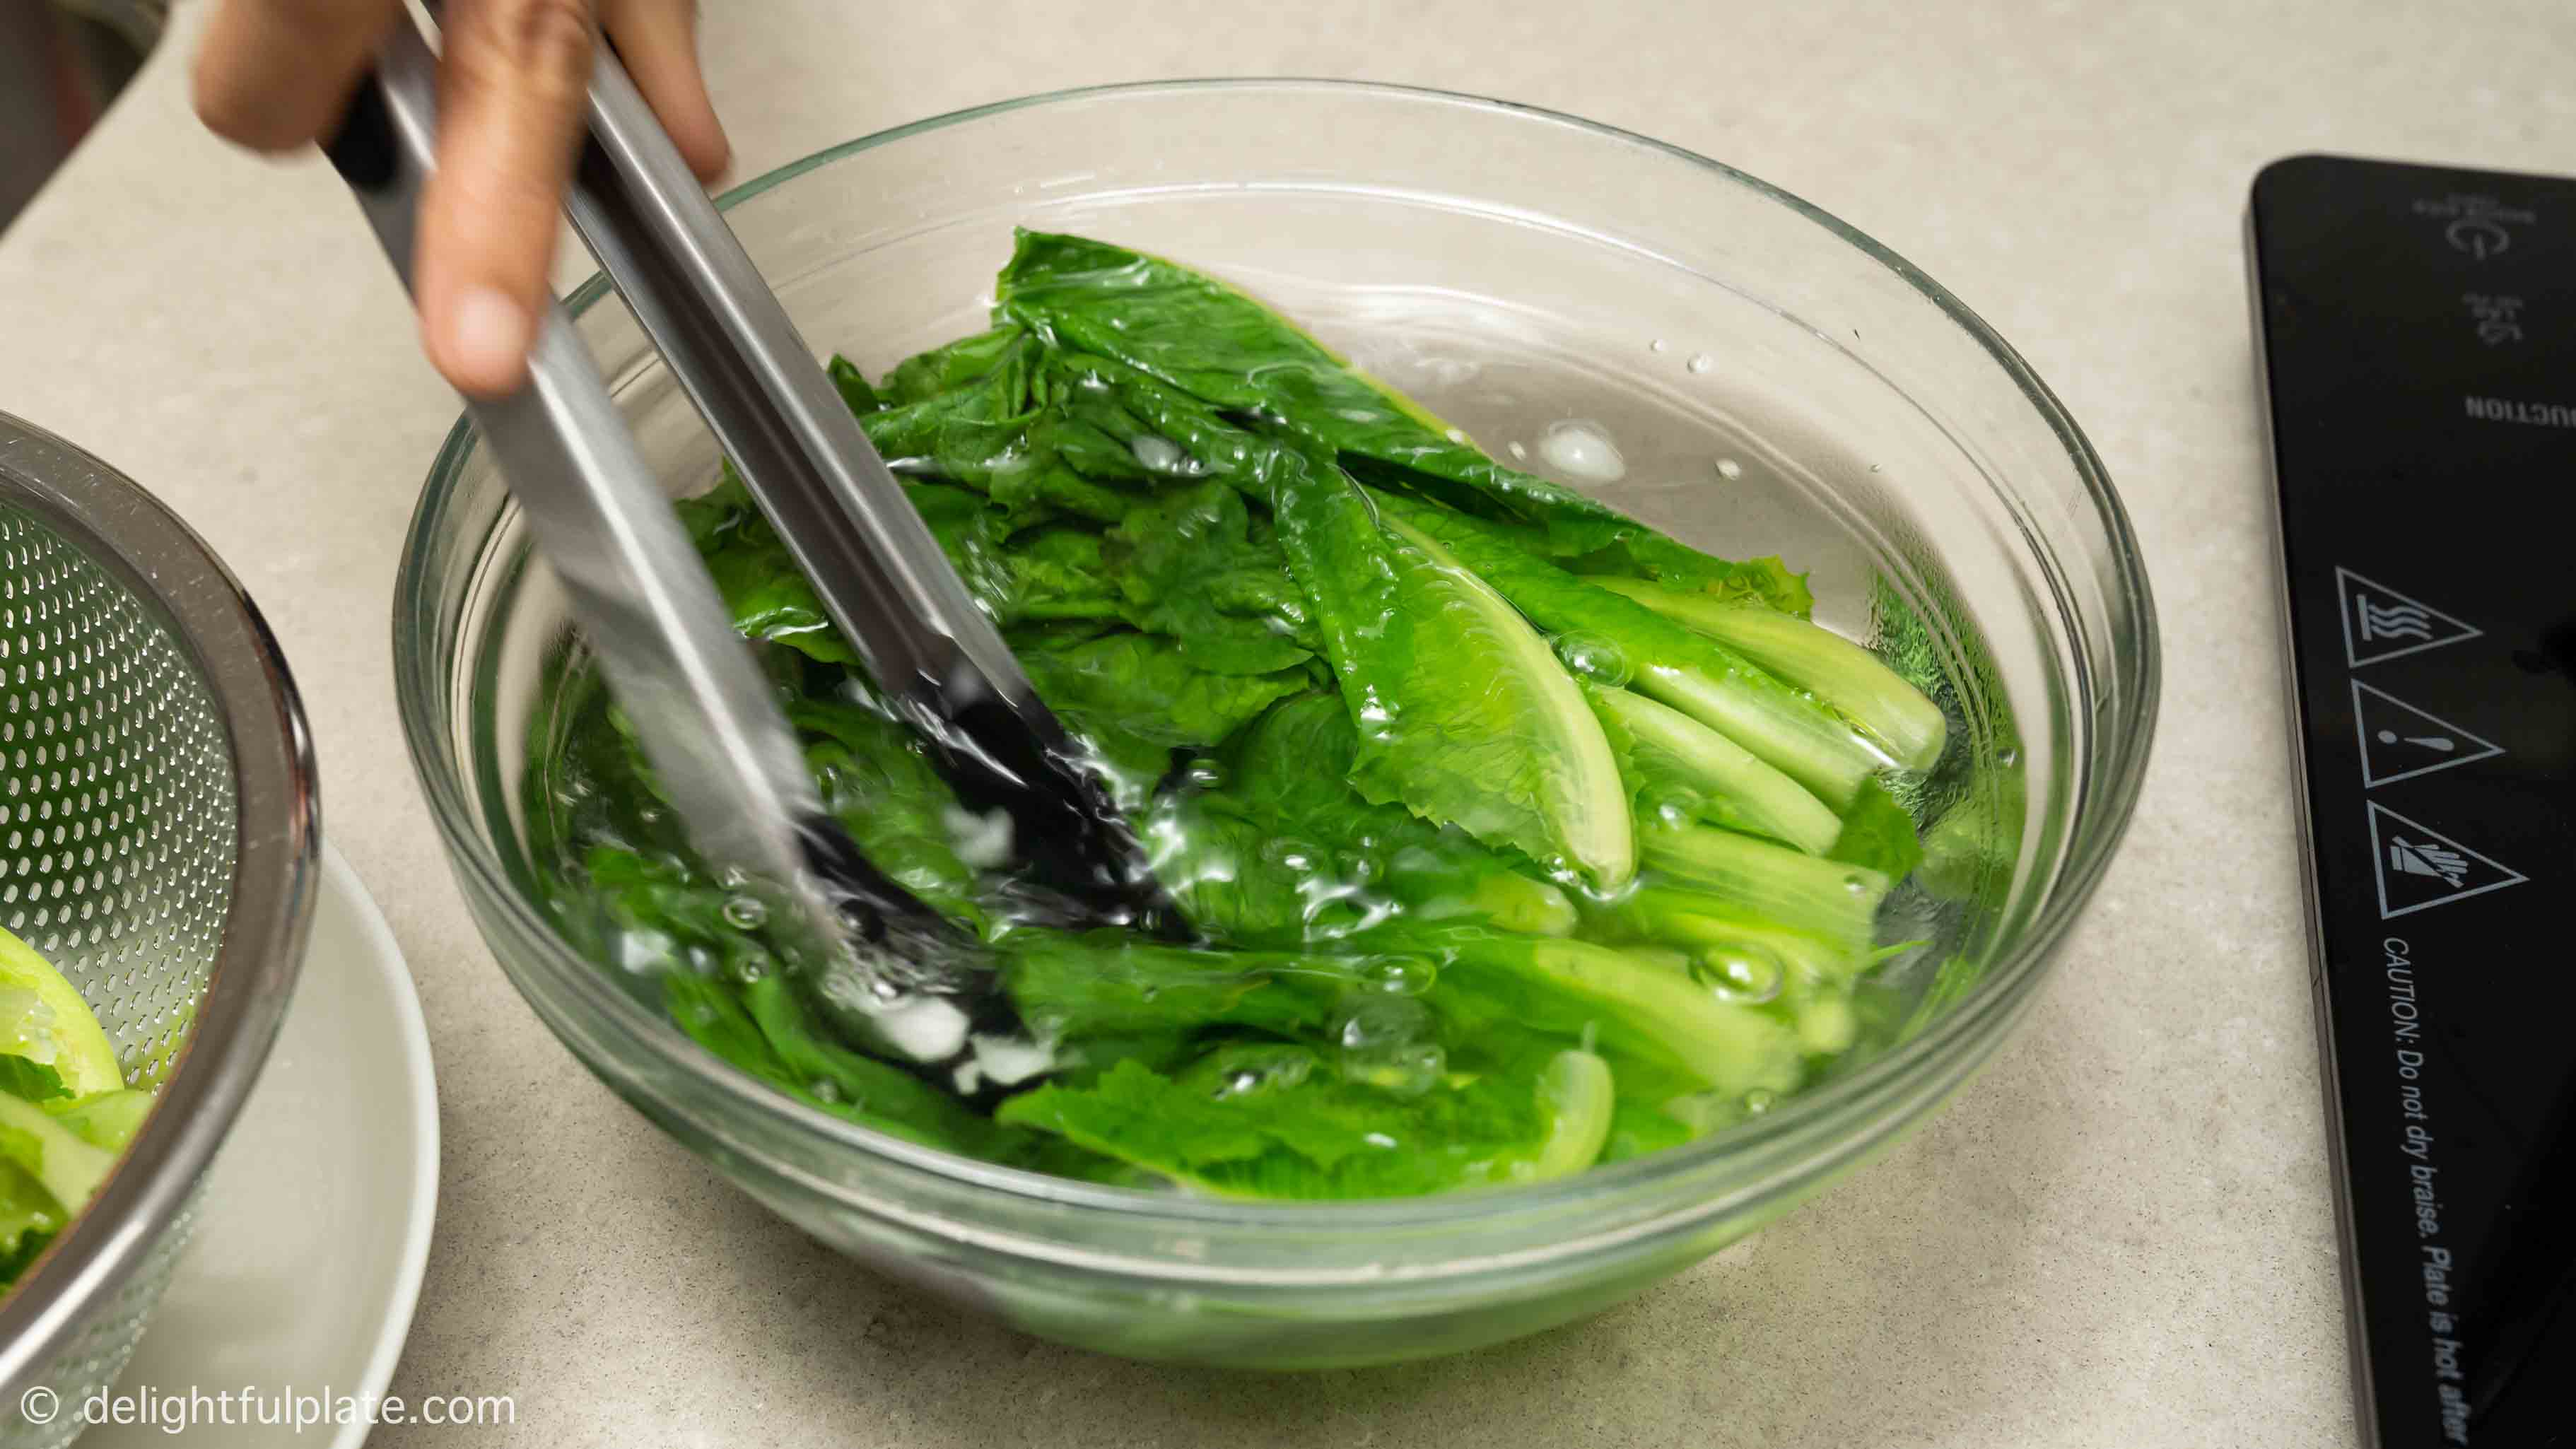 Placing romaine in a bowl of iced water